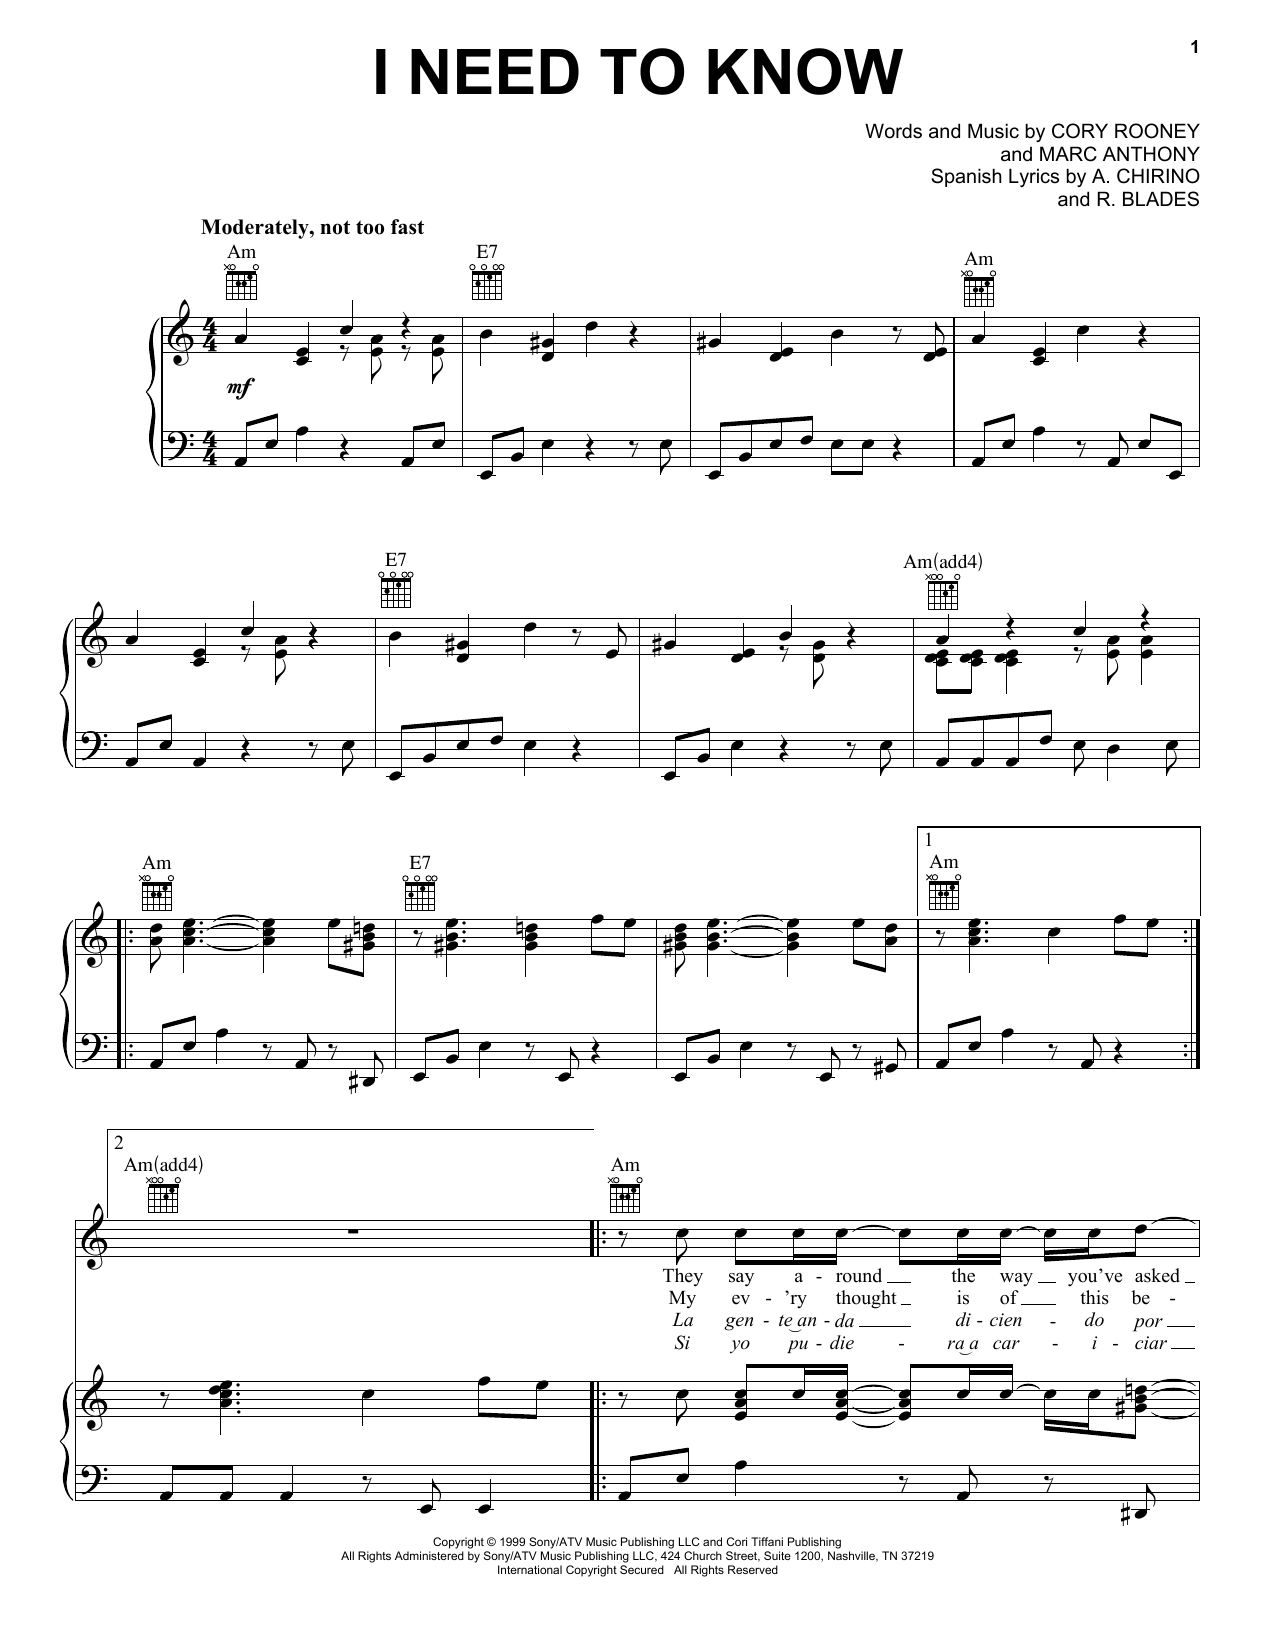 Marc Anthony I Need To Know sheet music notes and chords. Download Printable PDF.